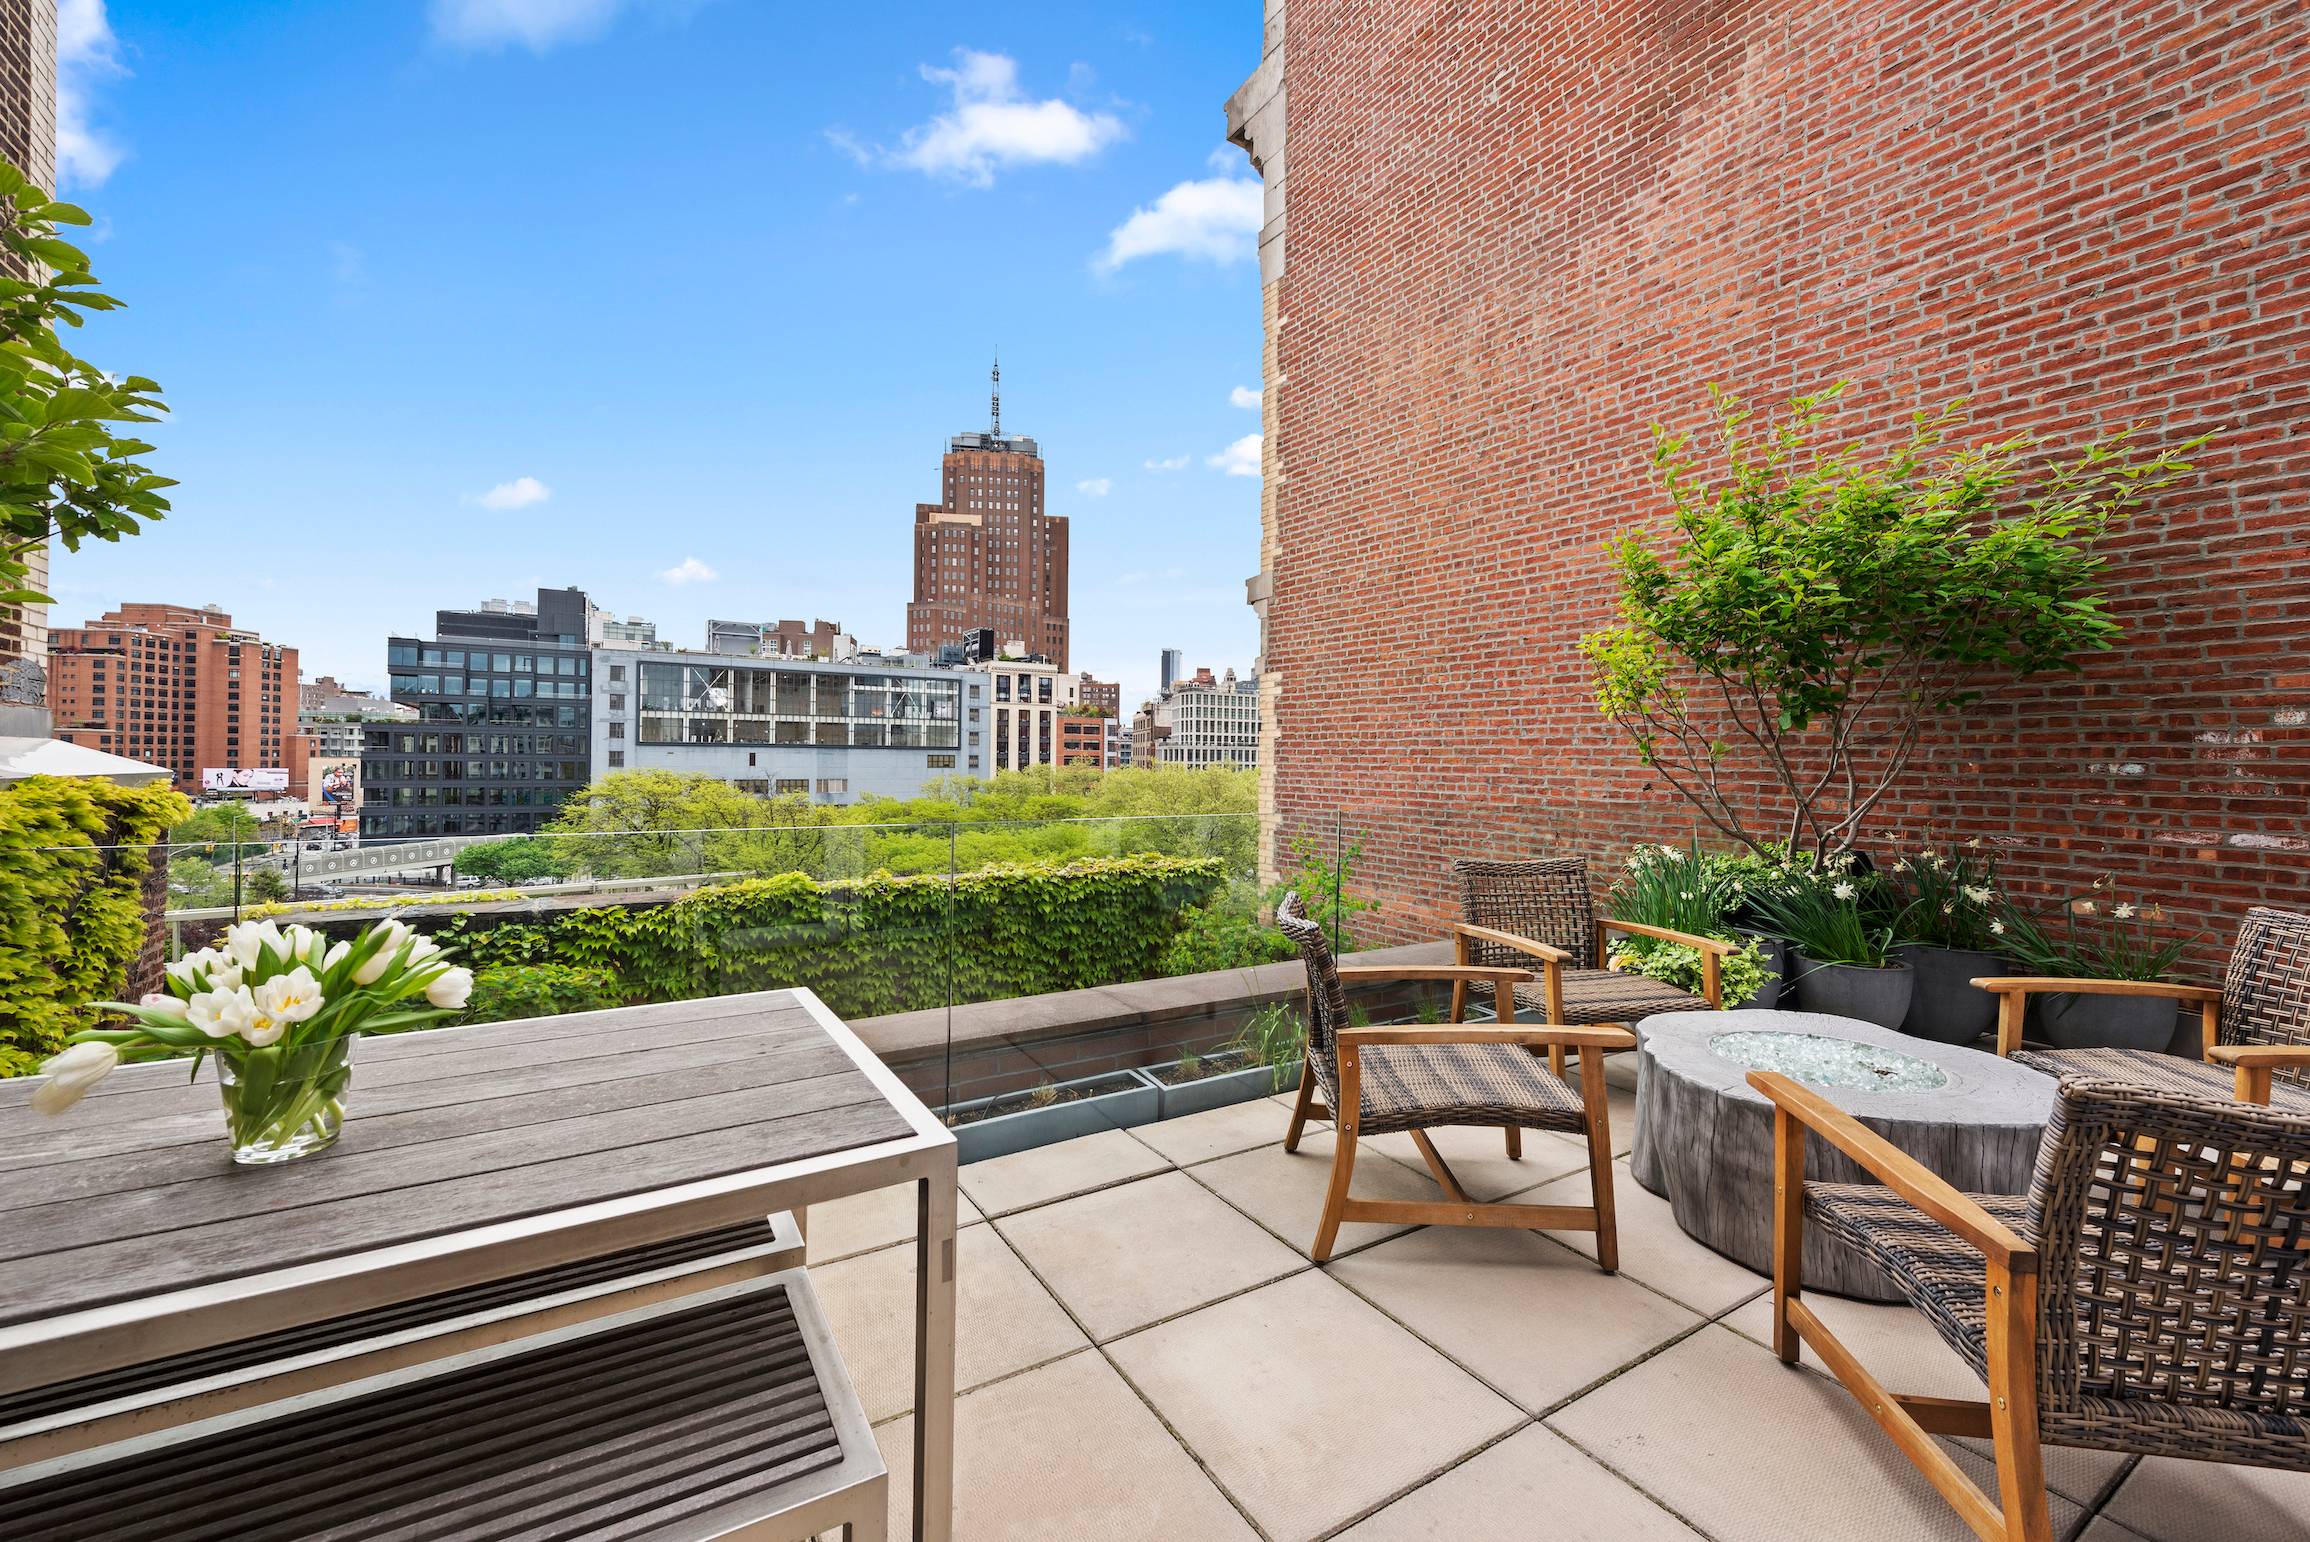 You must experience this one of a kind penthouse duplex to comprehend how it combines the expanse of a Tribeca loft with the intimacy of townhouse living perfected by three ...